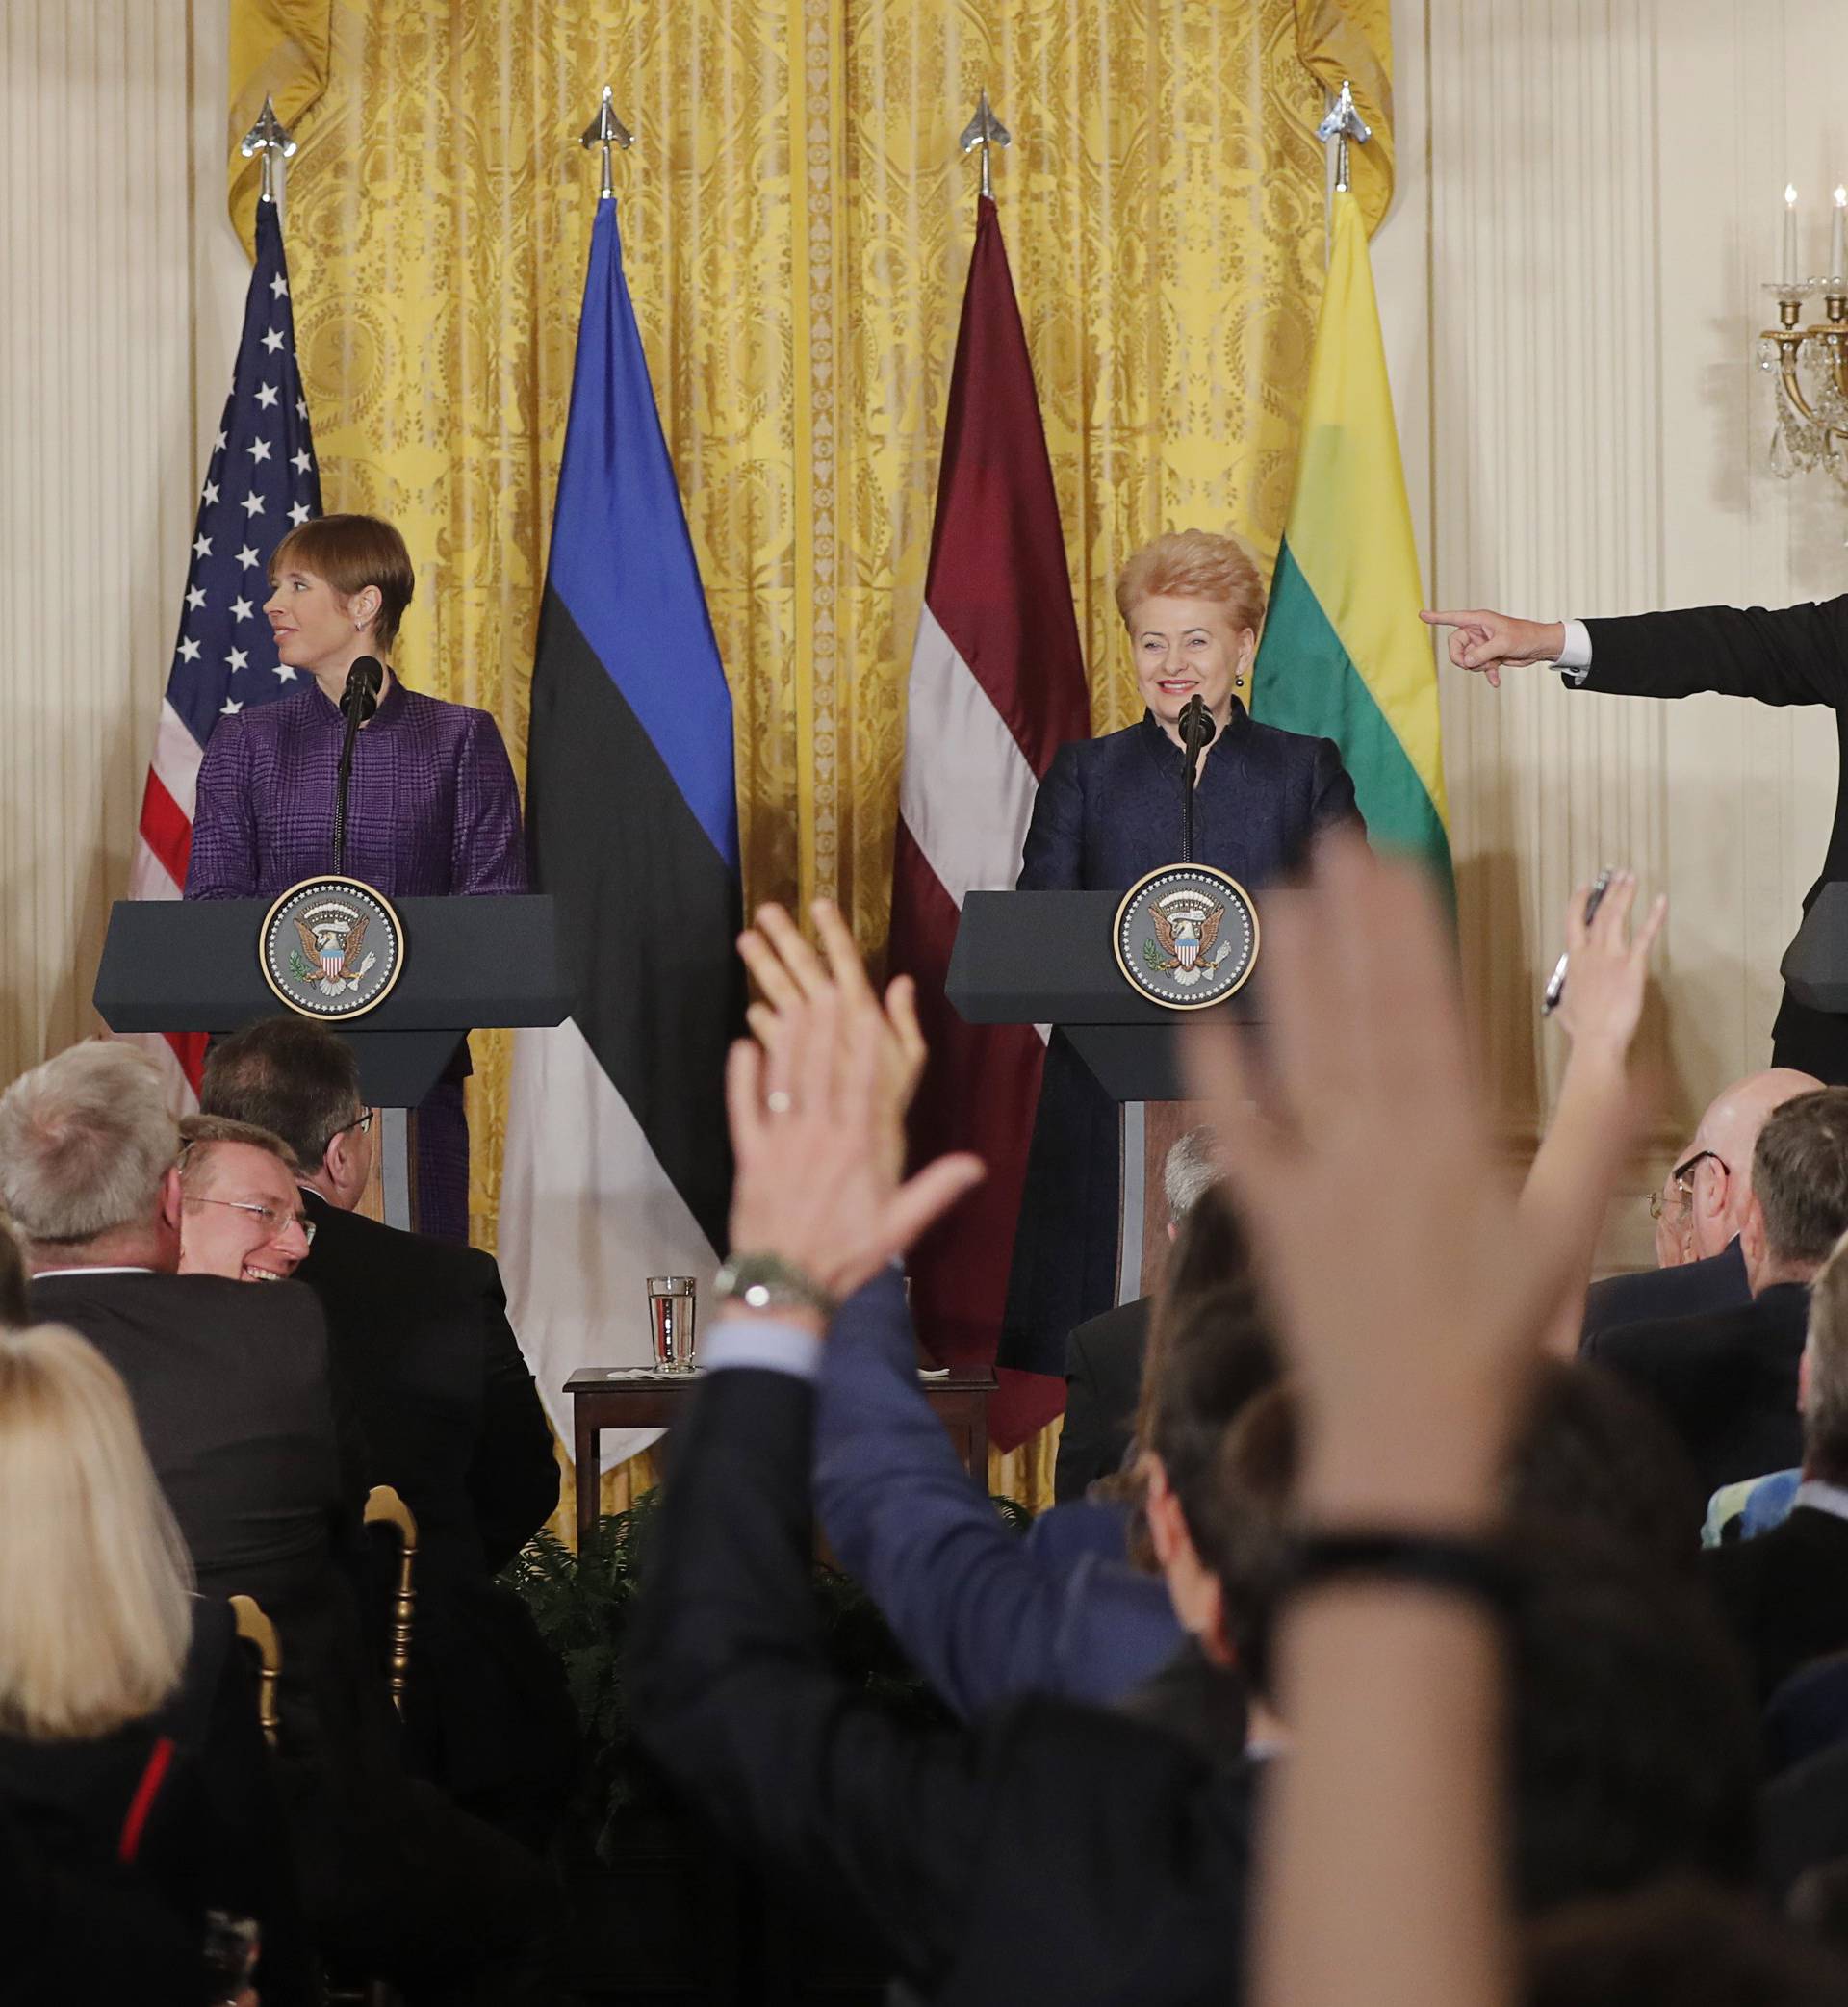 U.S. President Trump holds joint news conference with Latvia's President Vejonis, Estonia's President Kaljulaid and Lithuania's President Grybauskaite at the White House in Washington